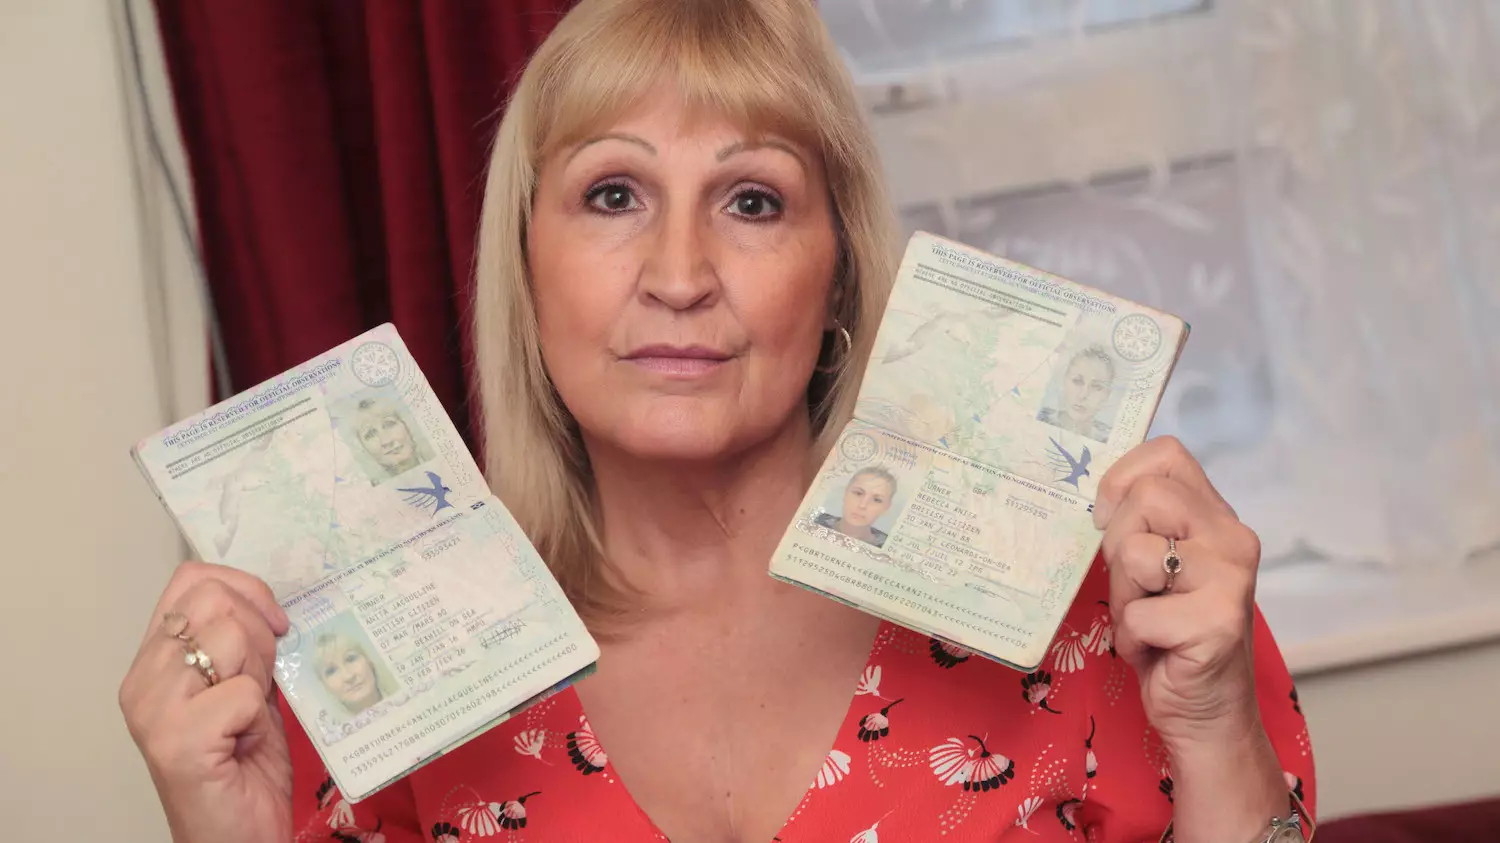 Mum Managed To Travel To Belgium And Back With Daughter's Passport